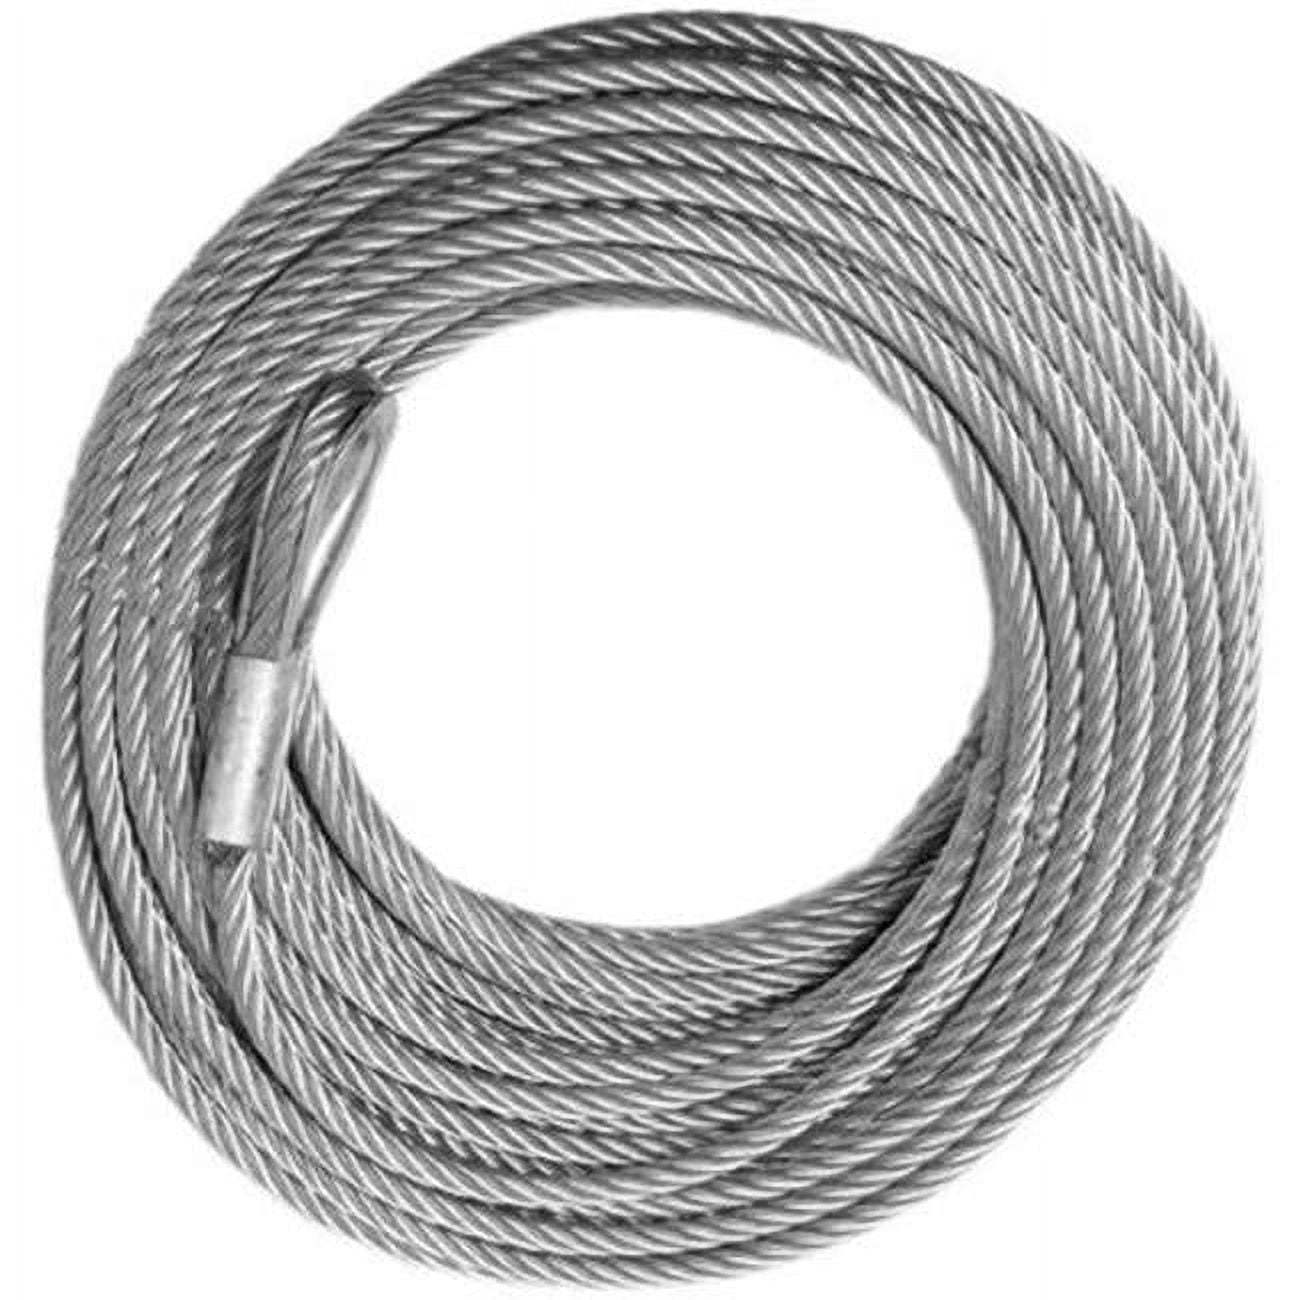 Winch Cable - Galvanized - 7/16 X 100 (17 600lb Strength) (4x4 Vehicle Recovery)